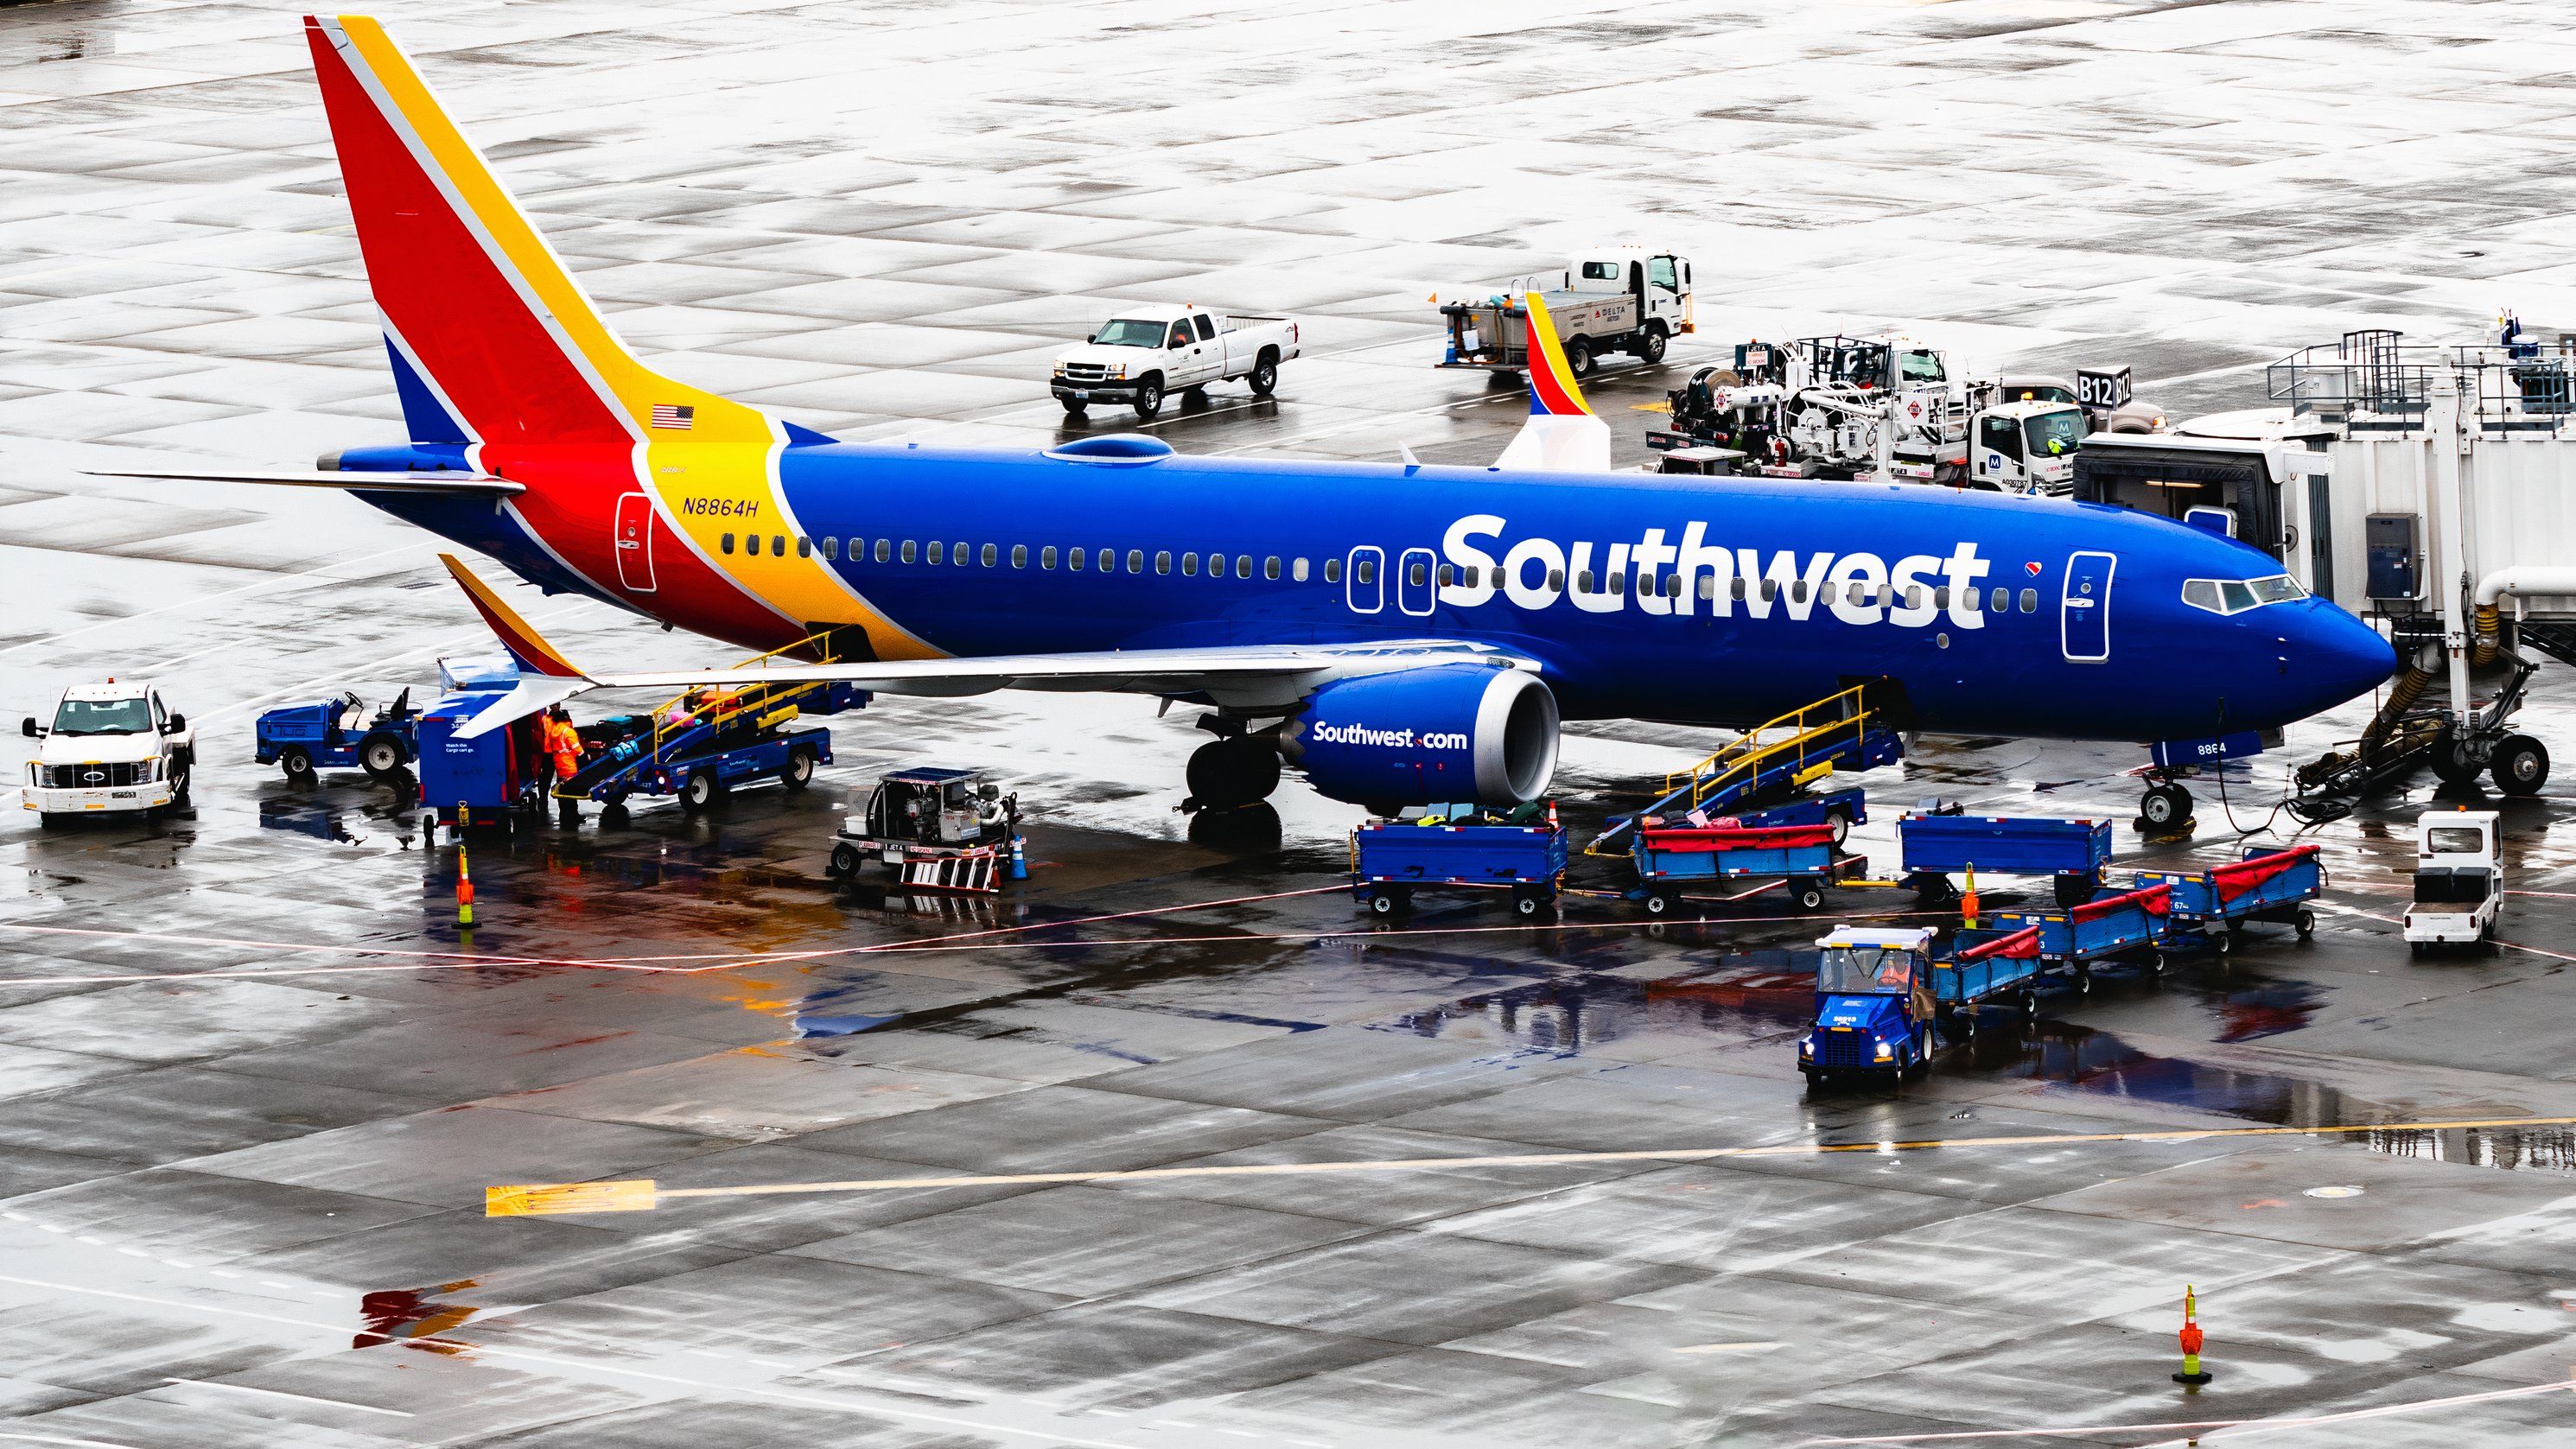 Loading Bags on a Southwest Airlines 737-8 MAX in the SEA Rain - 16x9